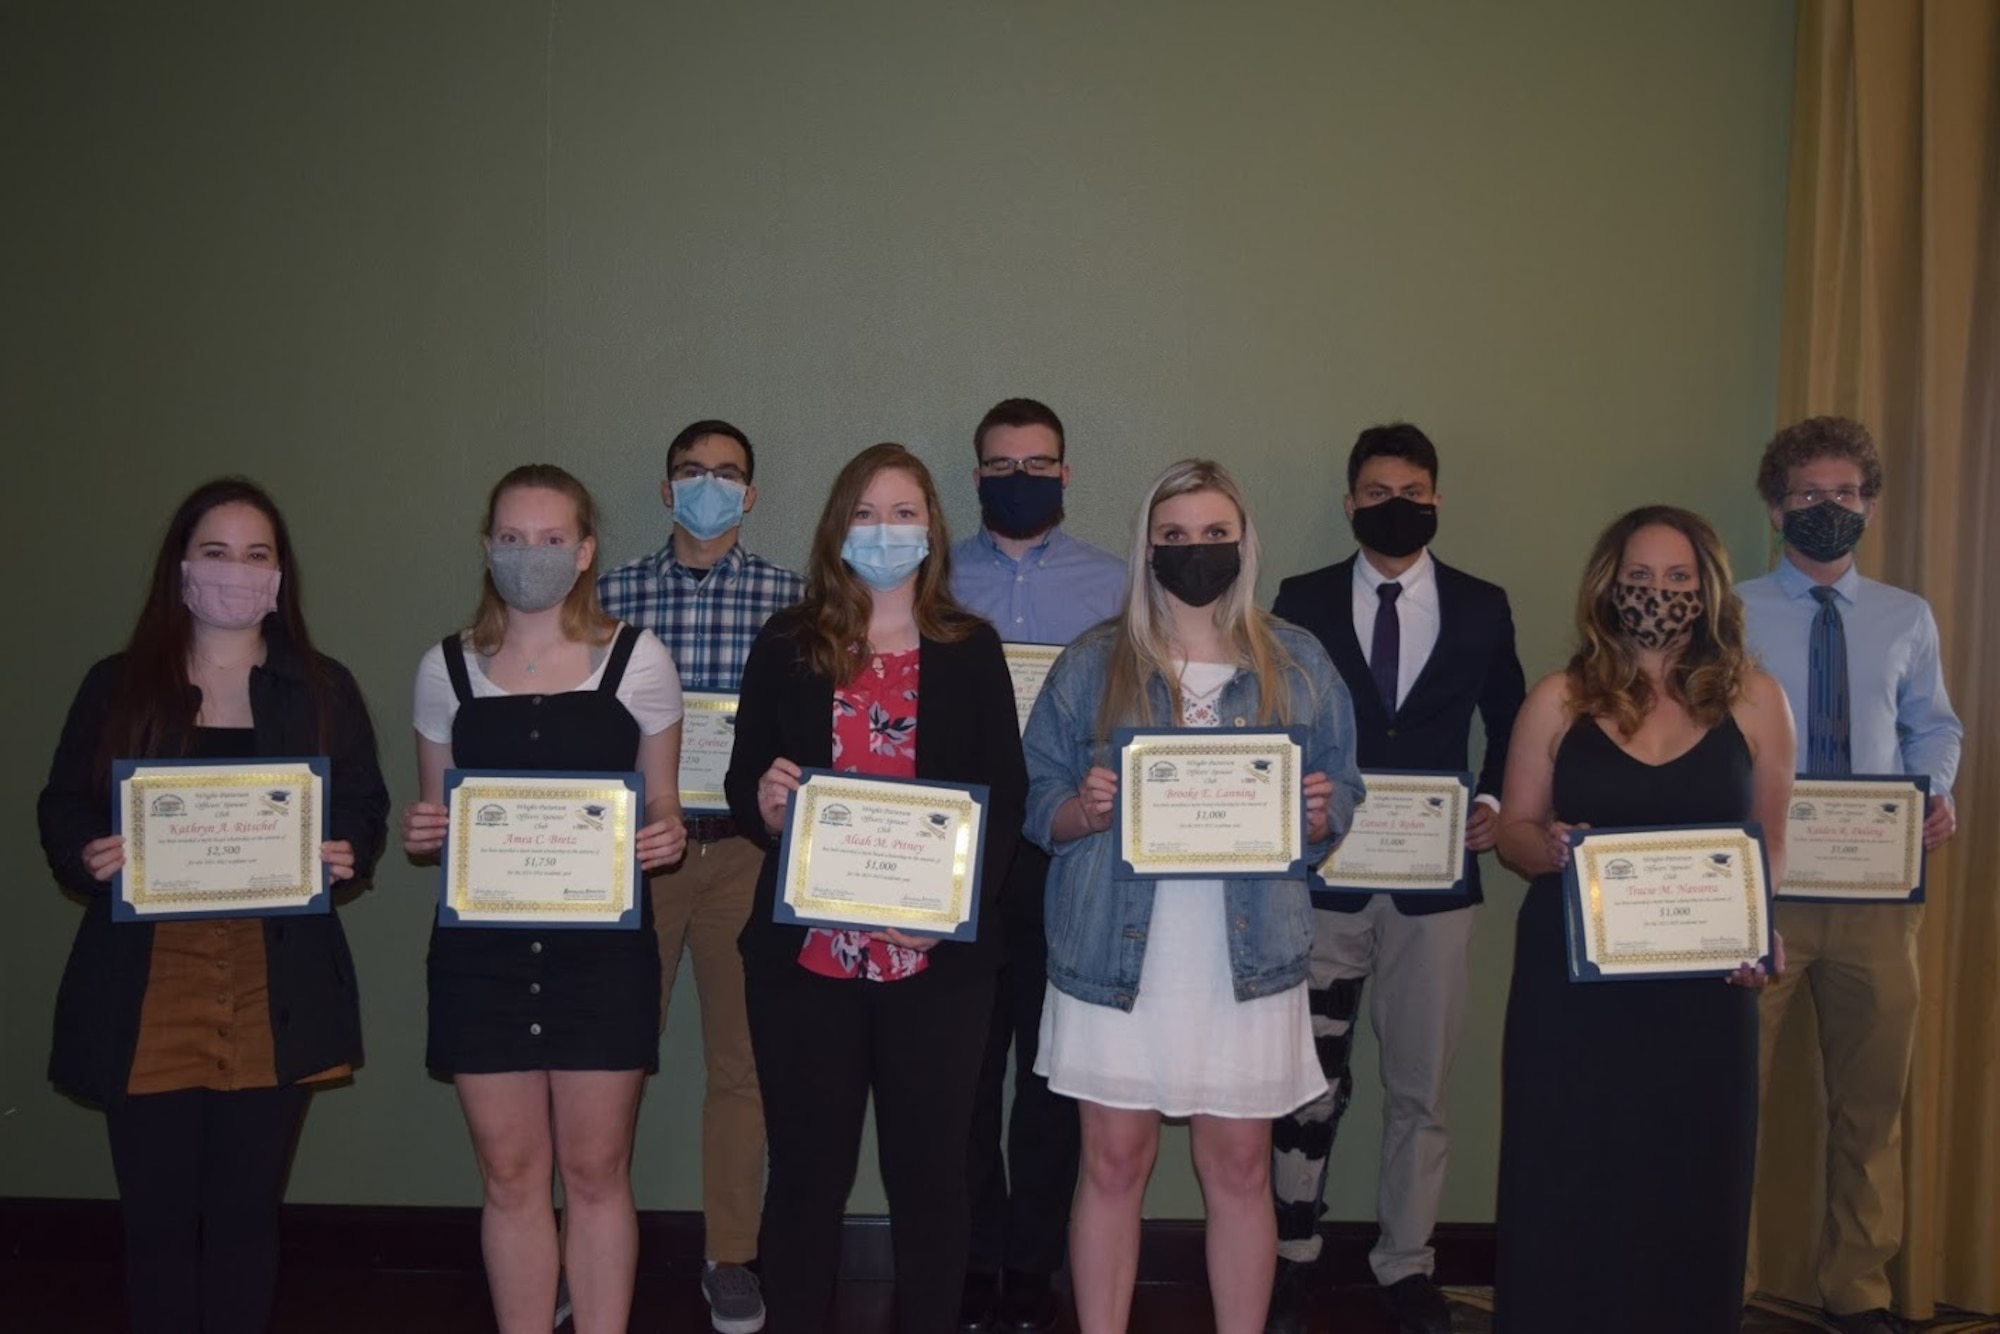 The 2021 Wright-Patterson Officers’ Spouses’ Club scholarship winners are (front row, from left) Kathryn Ritschel, Amea Bretz, Aleah Pitney, Brooke Lanning and Tracie Navarra. (Back row, from left) Christian Greiner, Landen Stricker, Carson Rohan and Kaiden Delsing. Not pictured: Riley Gallegos and Ryan Massie. (Contributed photo)